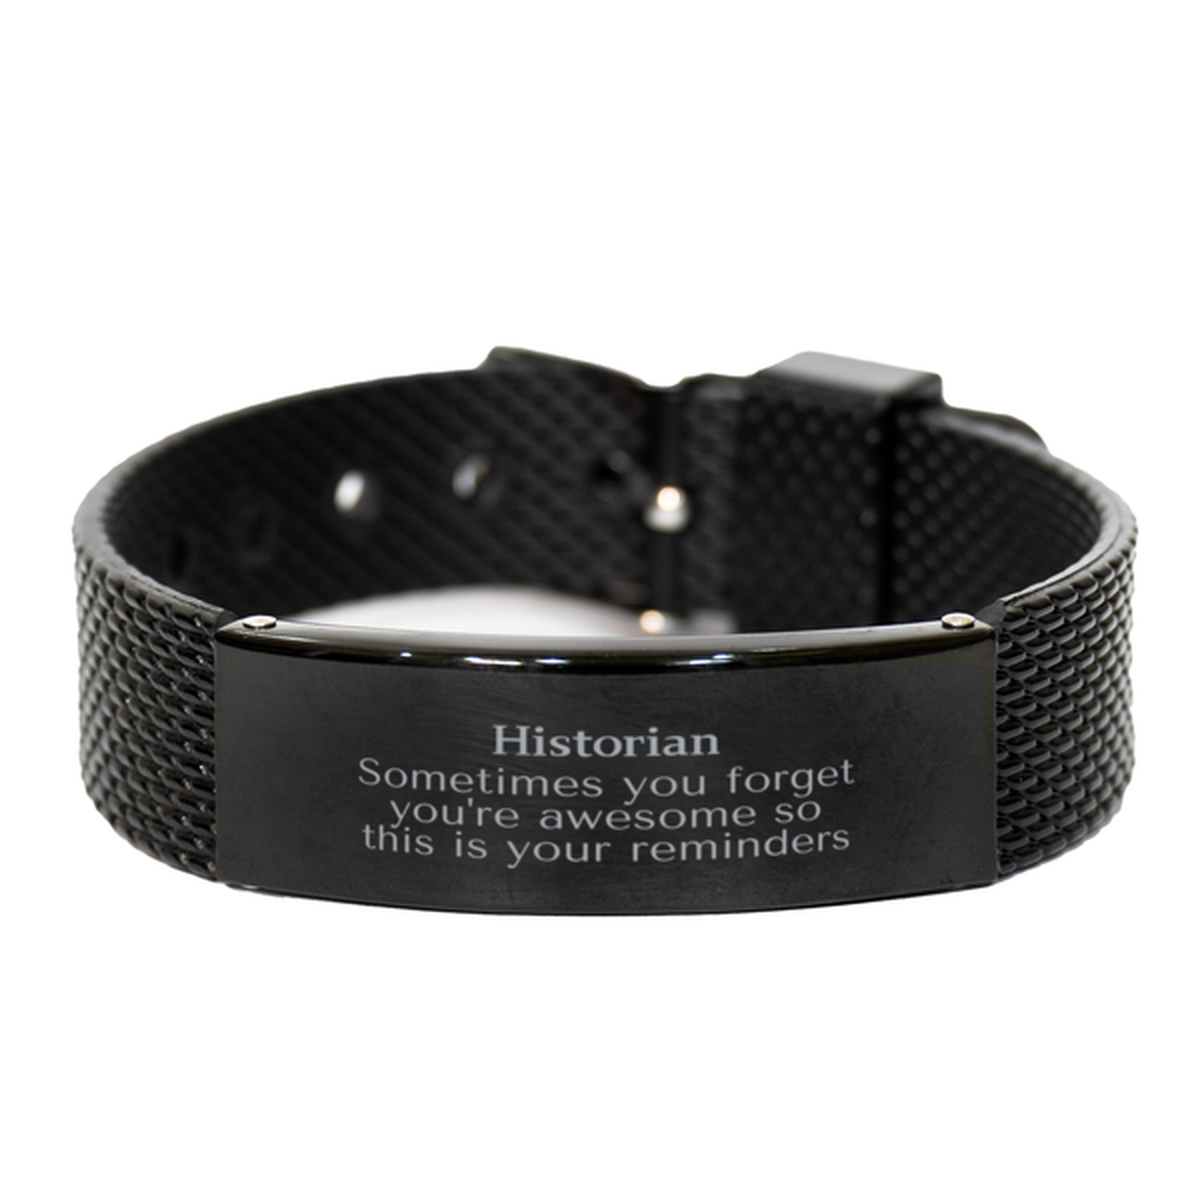 Sentimental Historian Black Shark Mesh Bracelet, Historian Sometimes you forget you're awesome so this is your reminders, Graduation Christmas Birthday Gifts for Historian, Men, Women, Coworkers